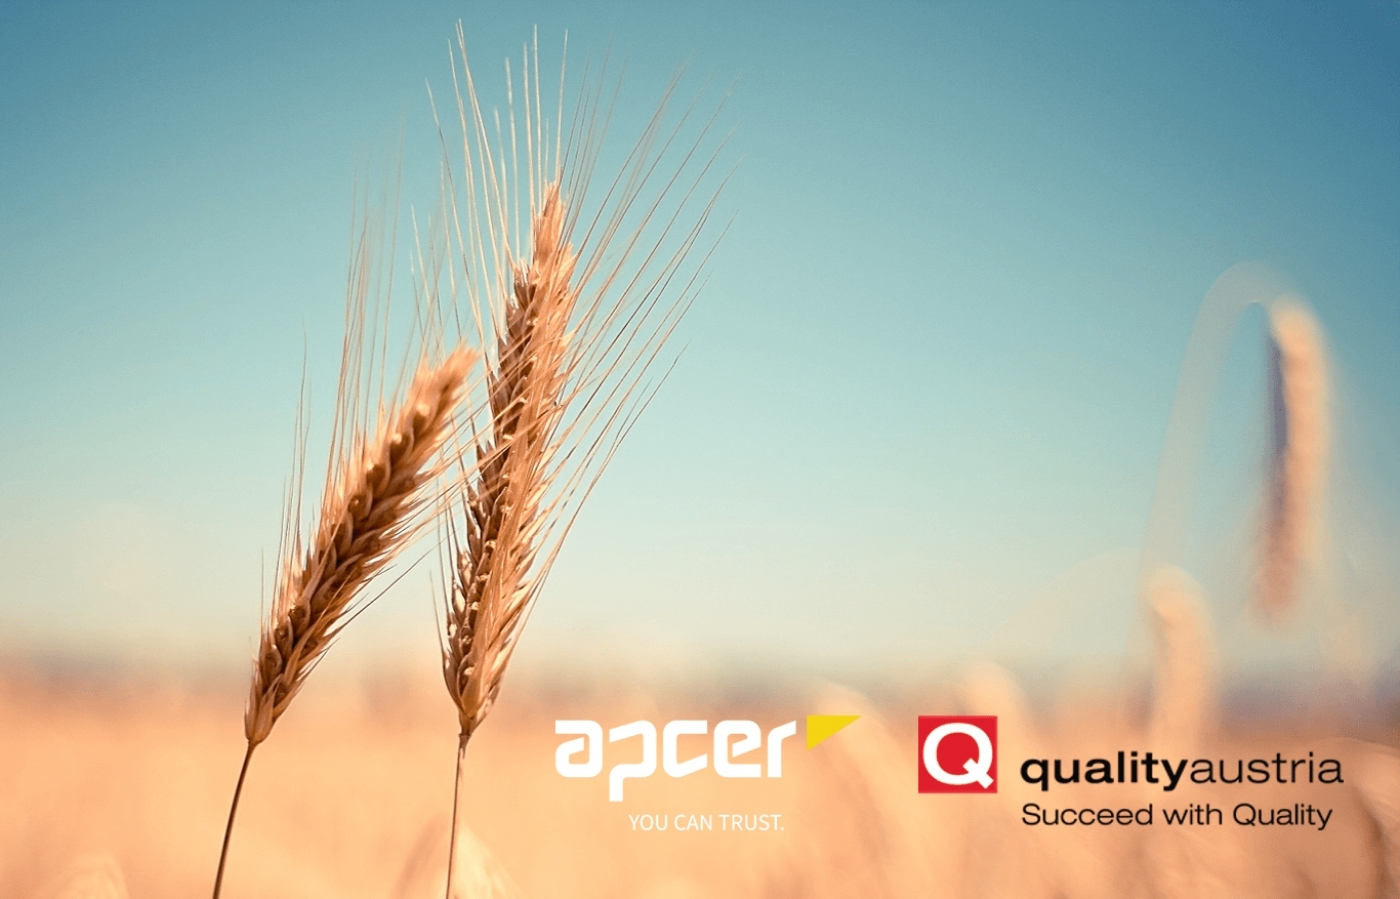 Partnership between APCER and Quality Austria